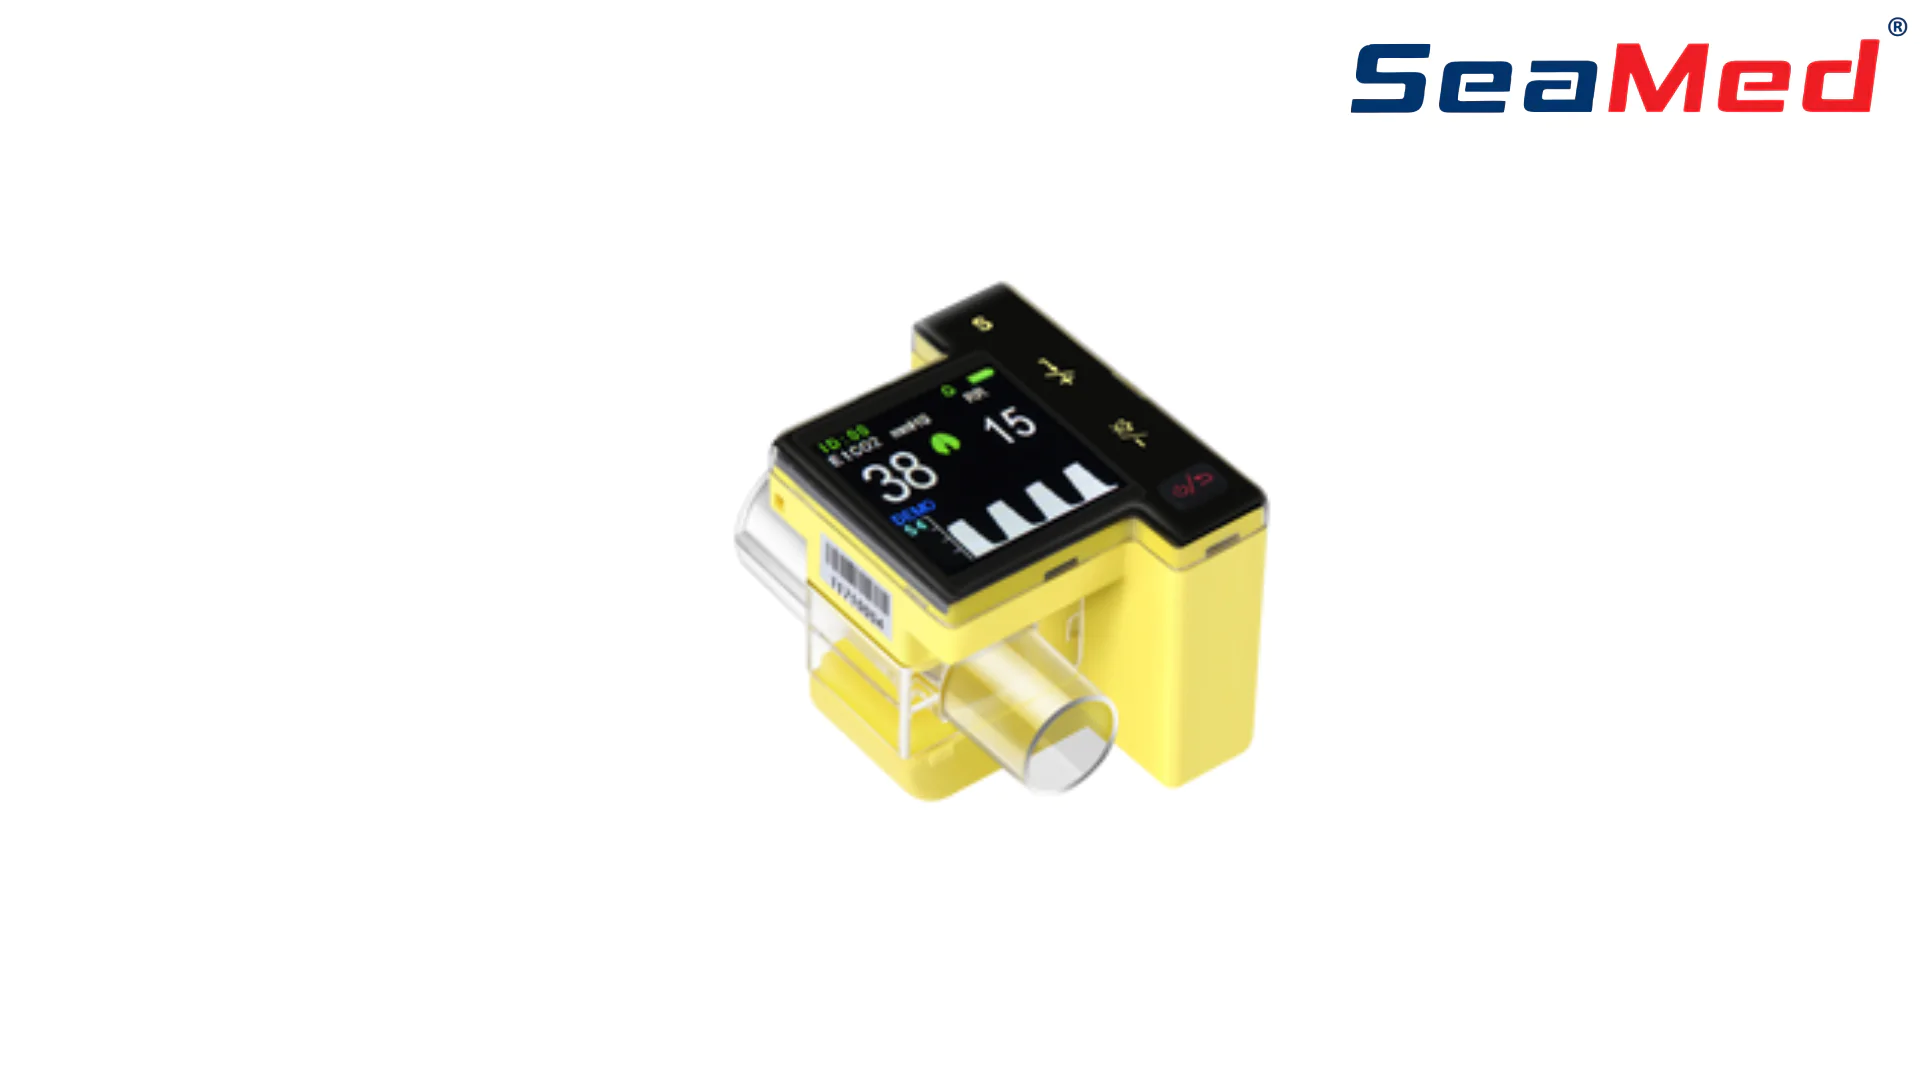 SEAMED CAPNOGRAPHY DEVICE